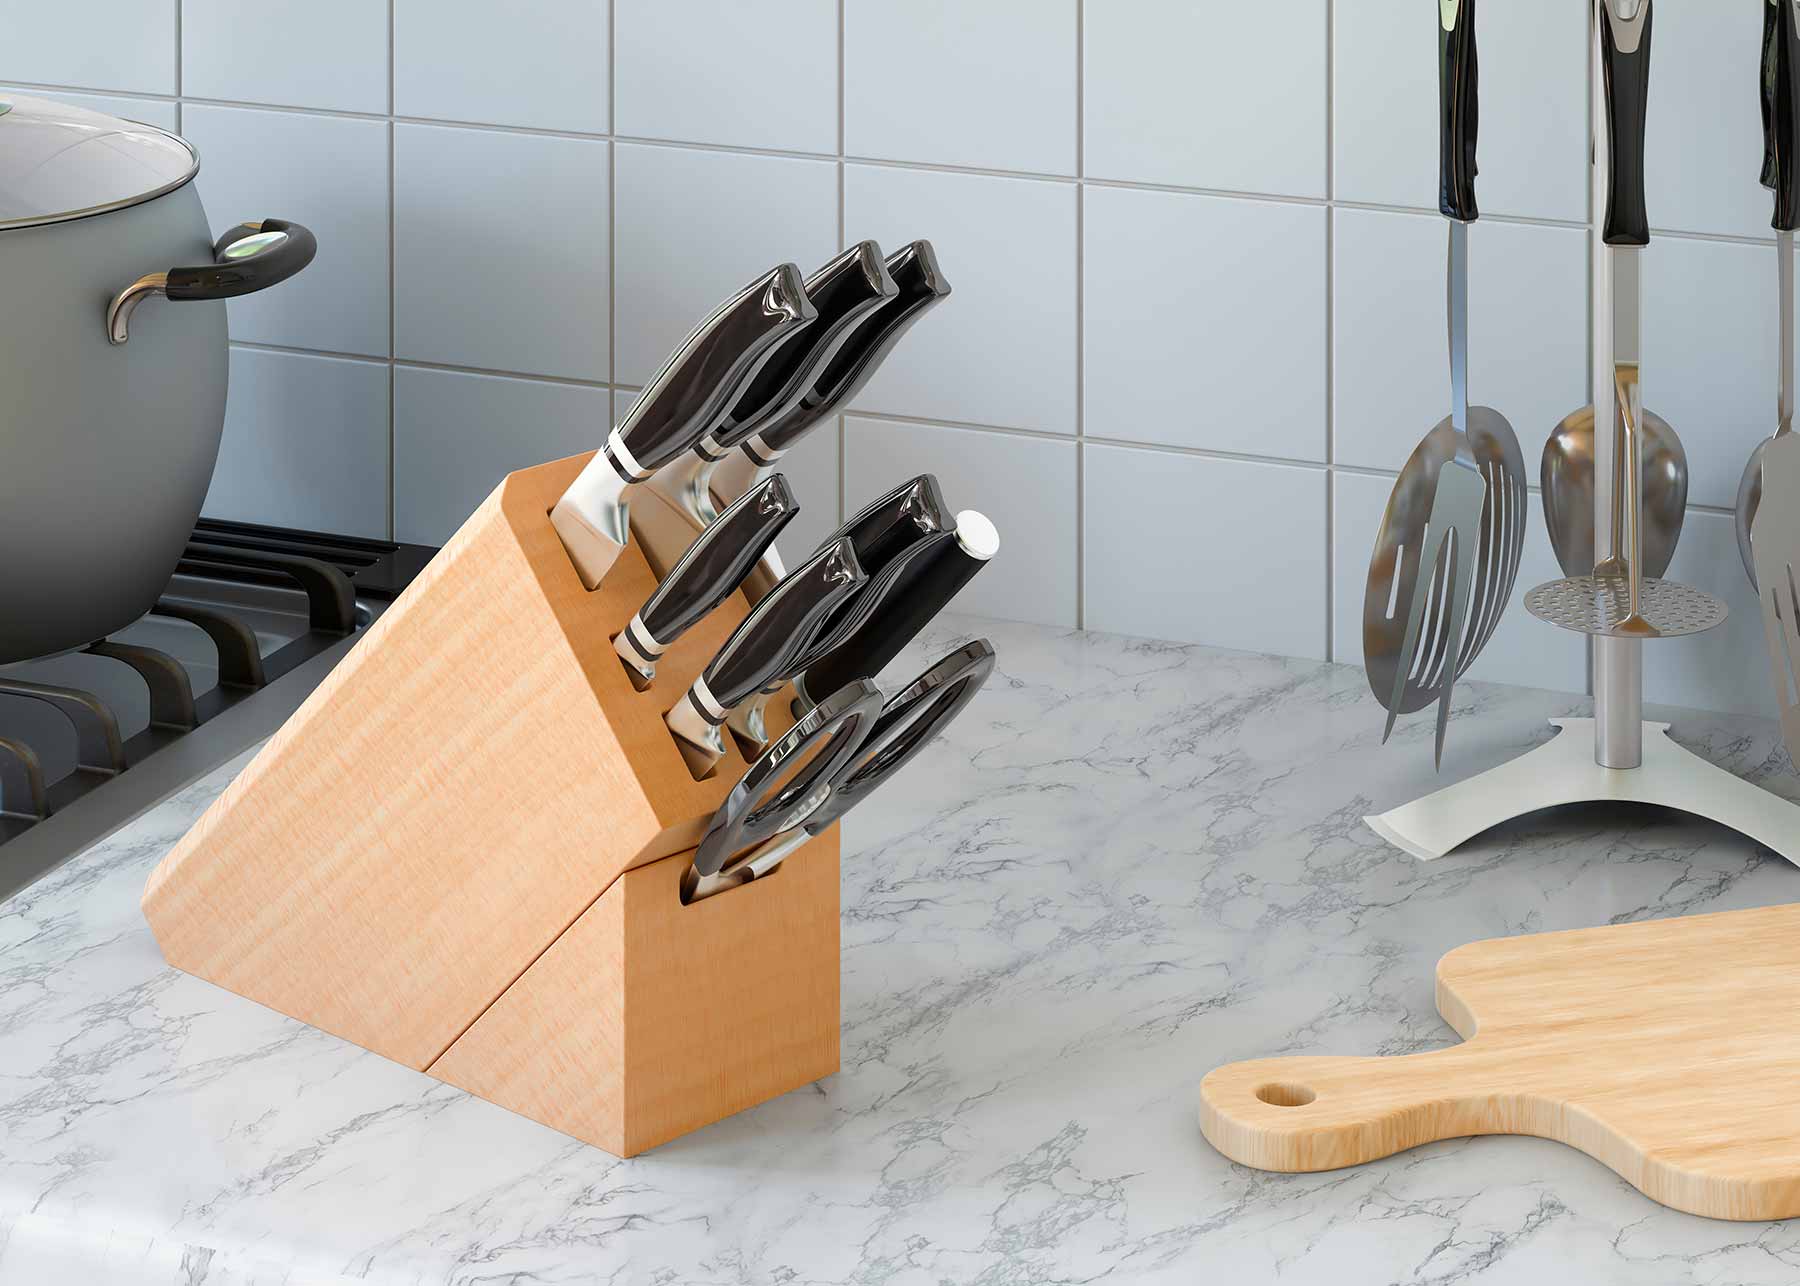 https://withjoy.com/blog/wp-content/uploads/2022/08/Best-Knives-and-Cutting-Boards.jpg